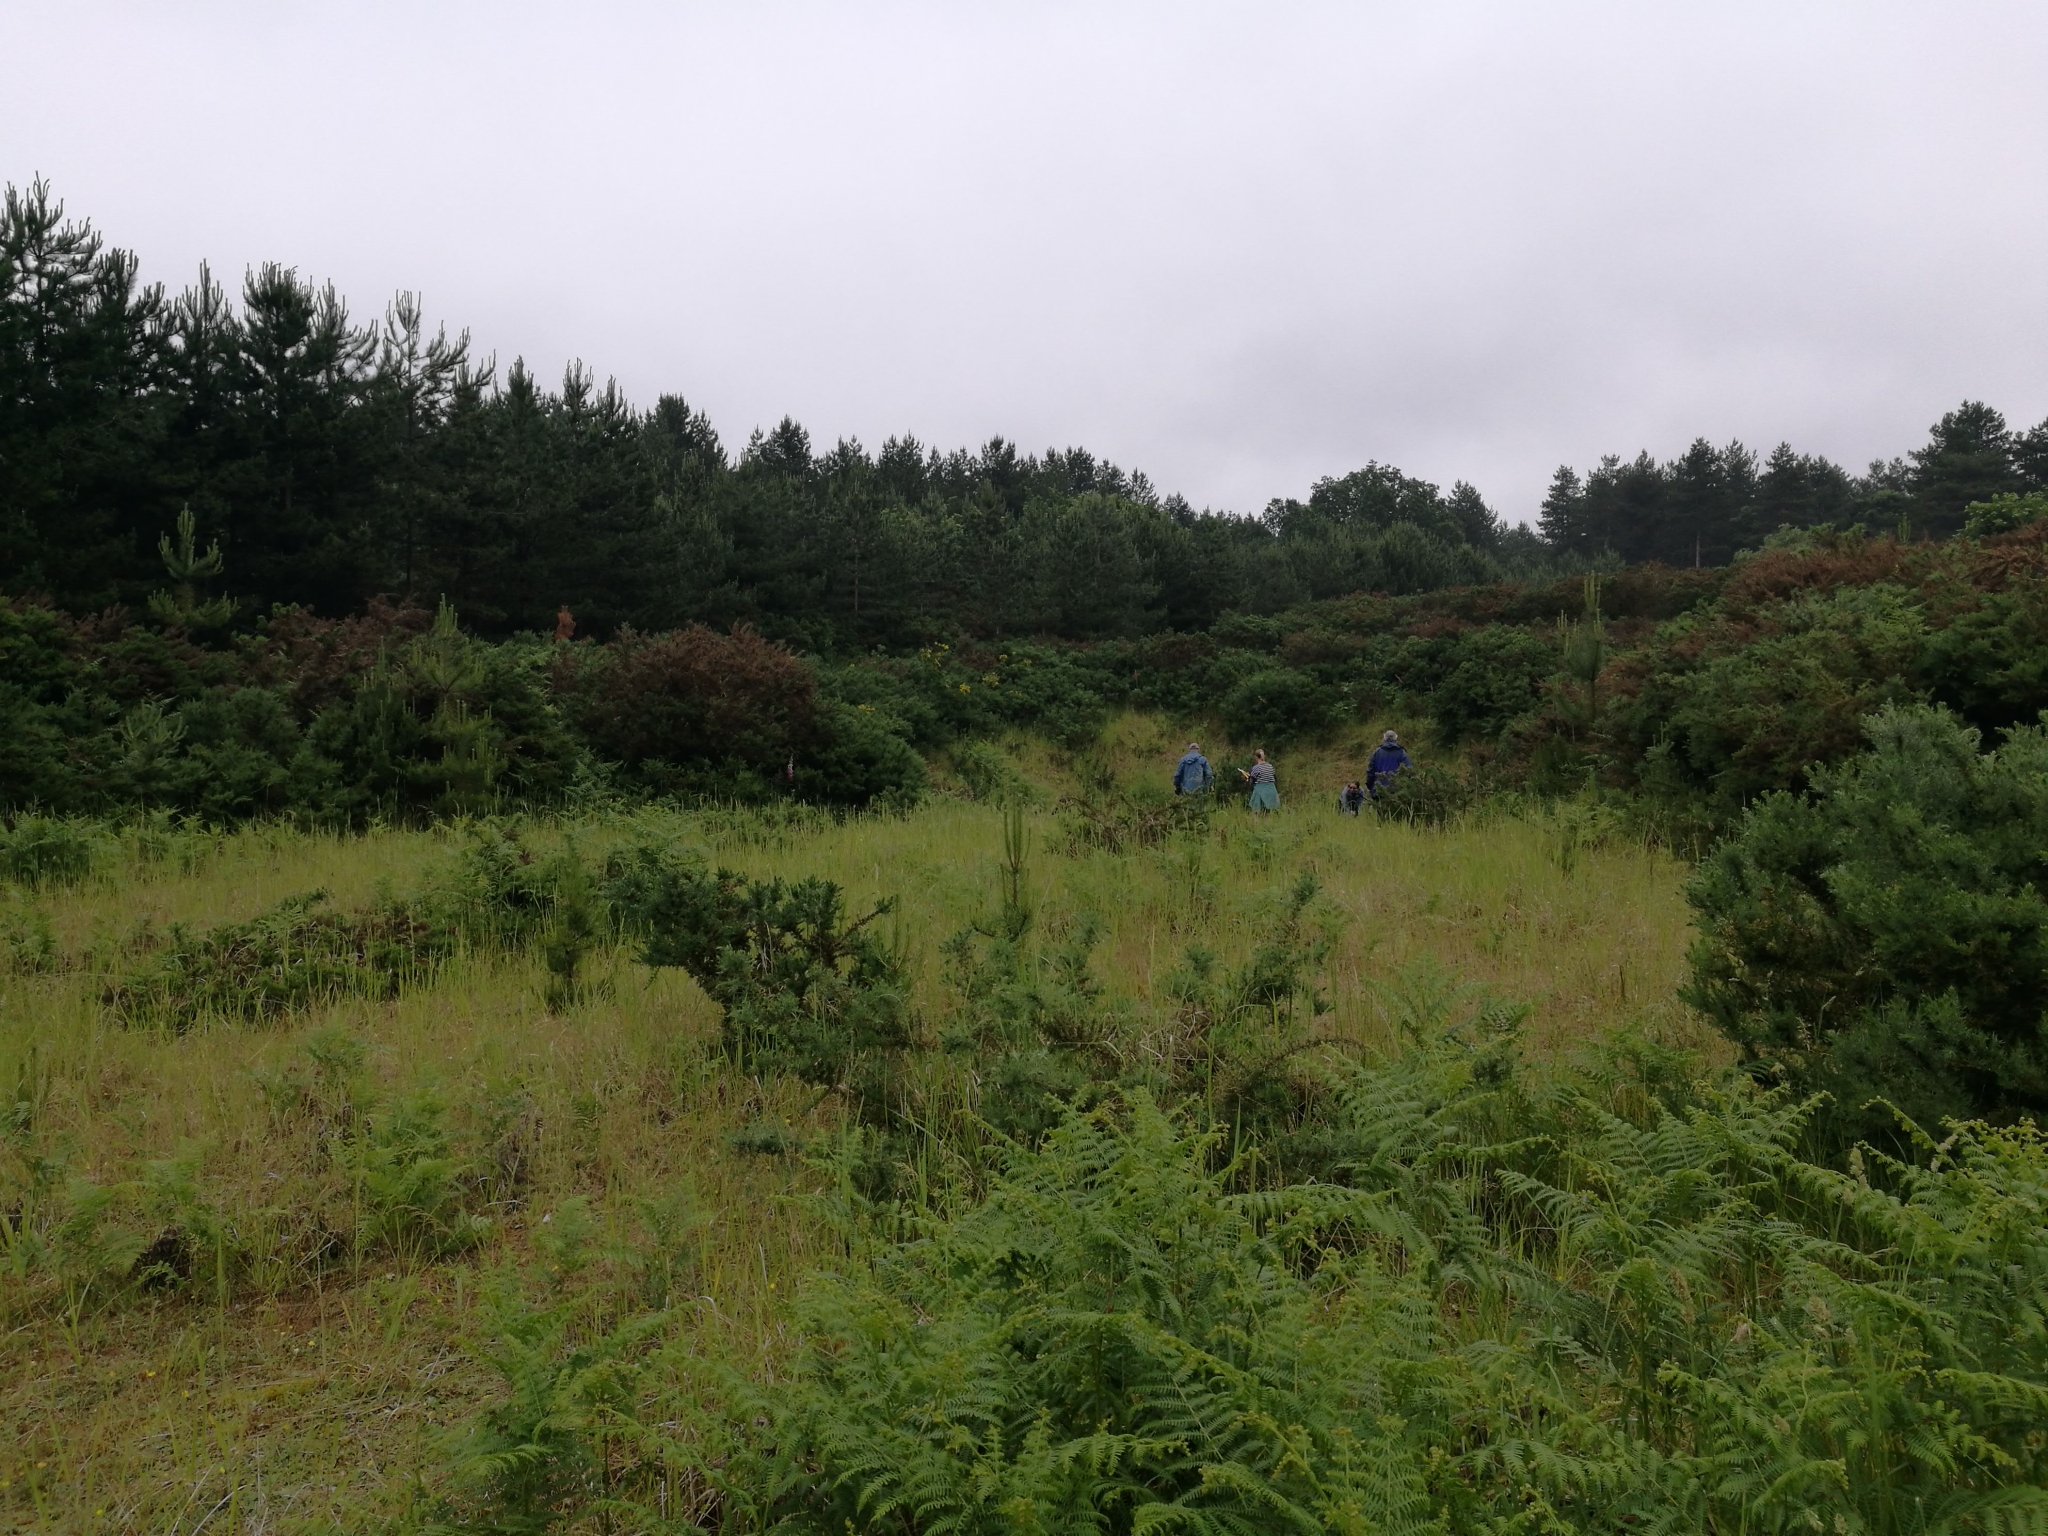 A photo from the FoTF Conservation Event - June 2021 - Brash Clearance at Mildenhall Mugwort Pit : A shot of across Mildenhall Mugwort Pit with volunteers seen in the background working in the pit